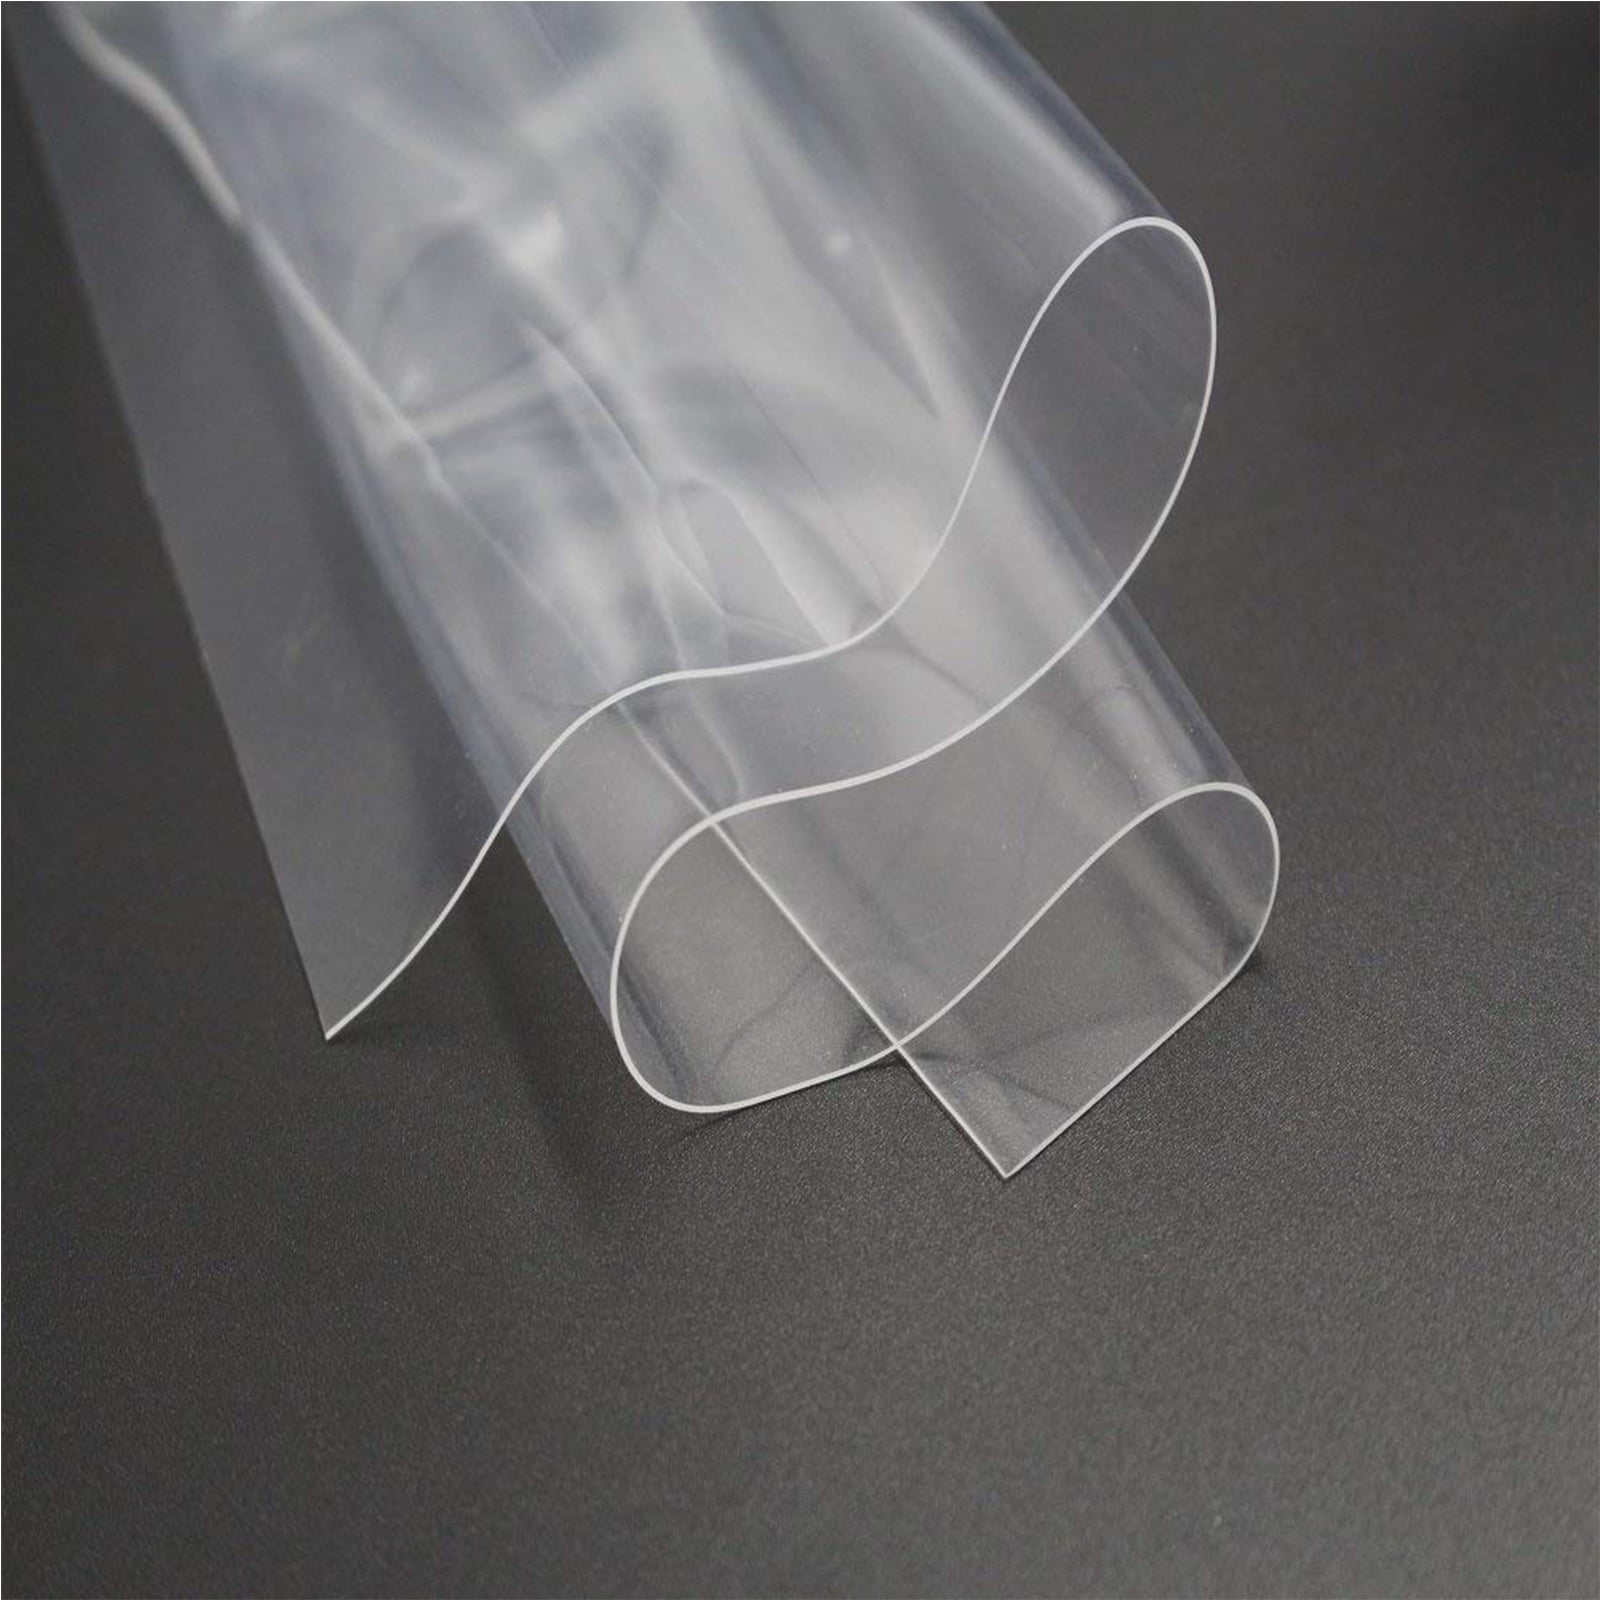 INTBUYING 16”x24”x 0.31” Heat Resistant Silicone Pad for Flat Heat